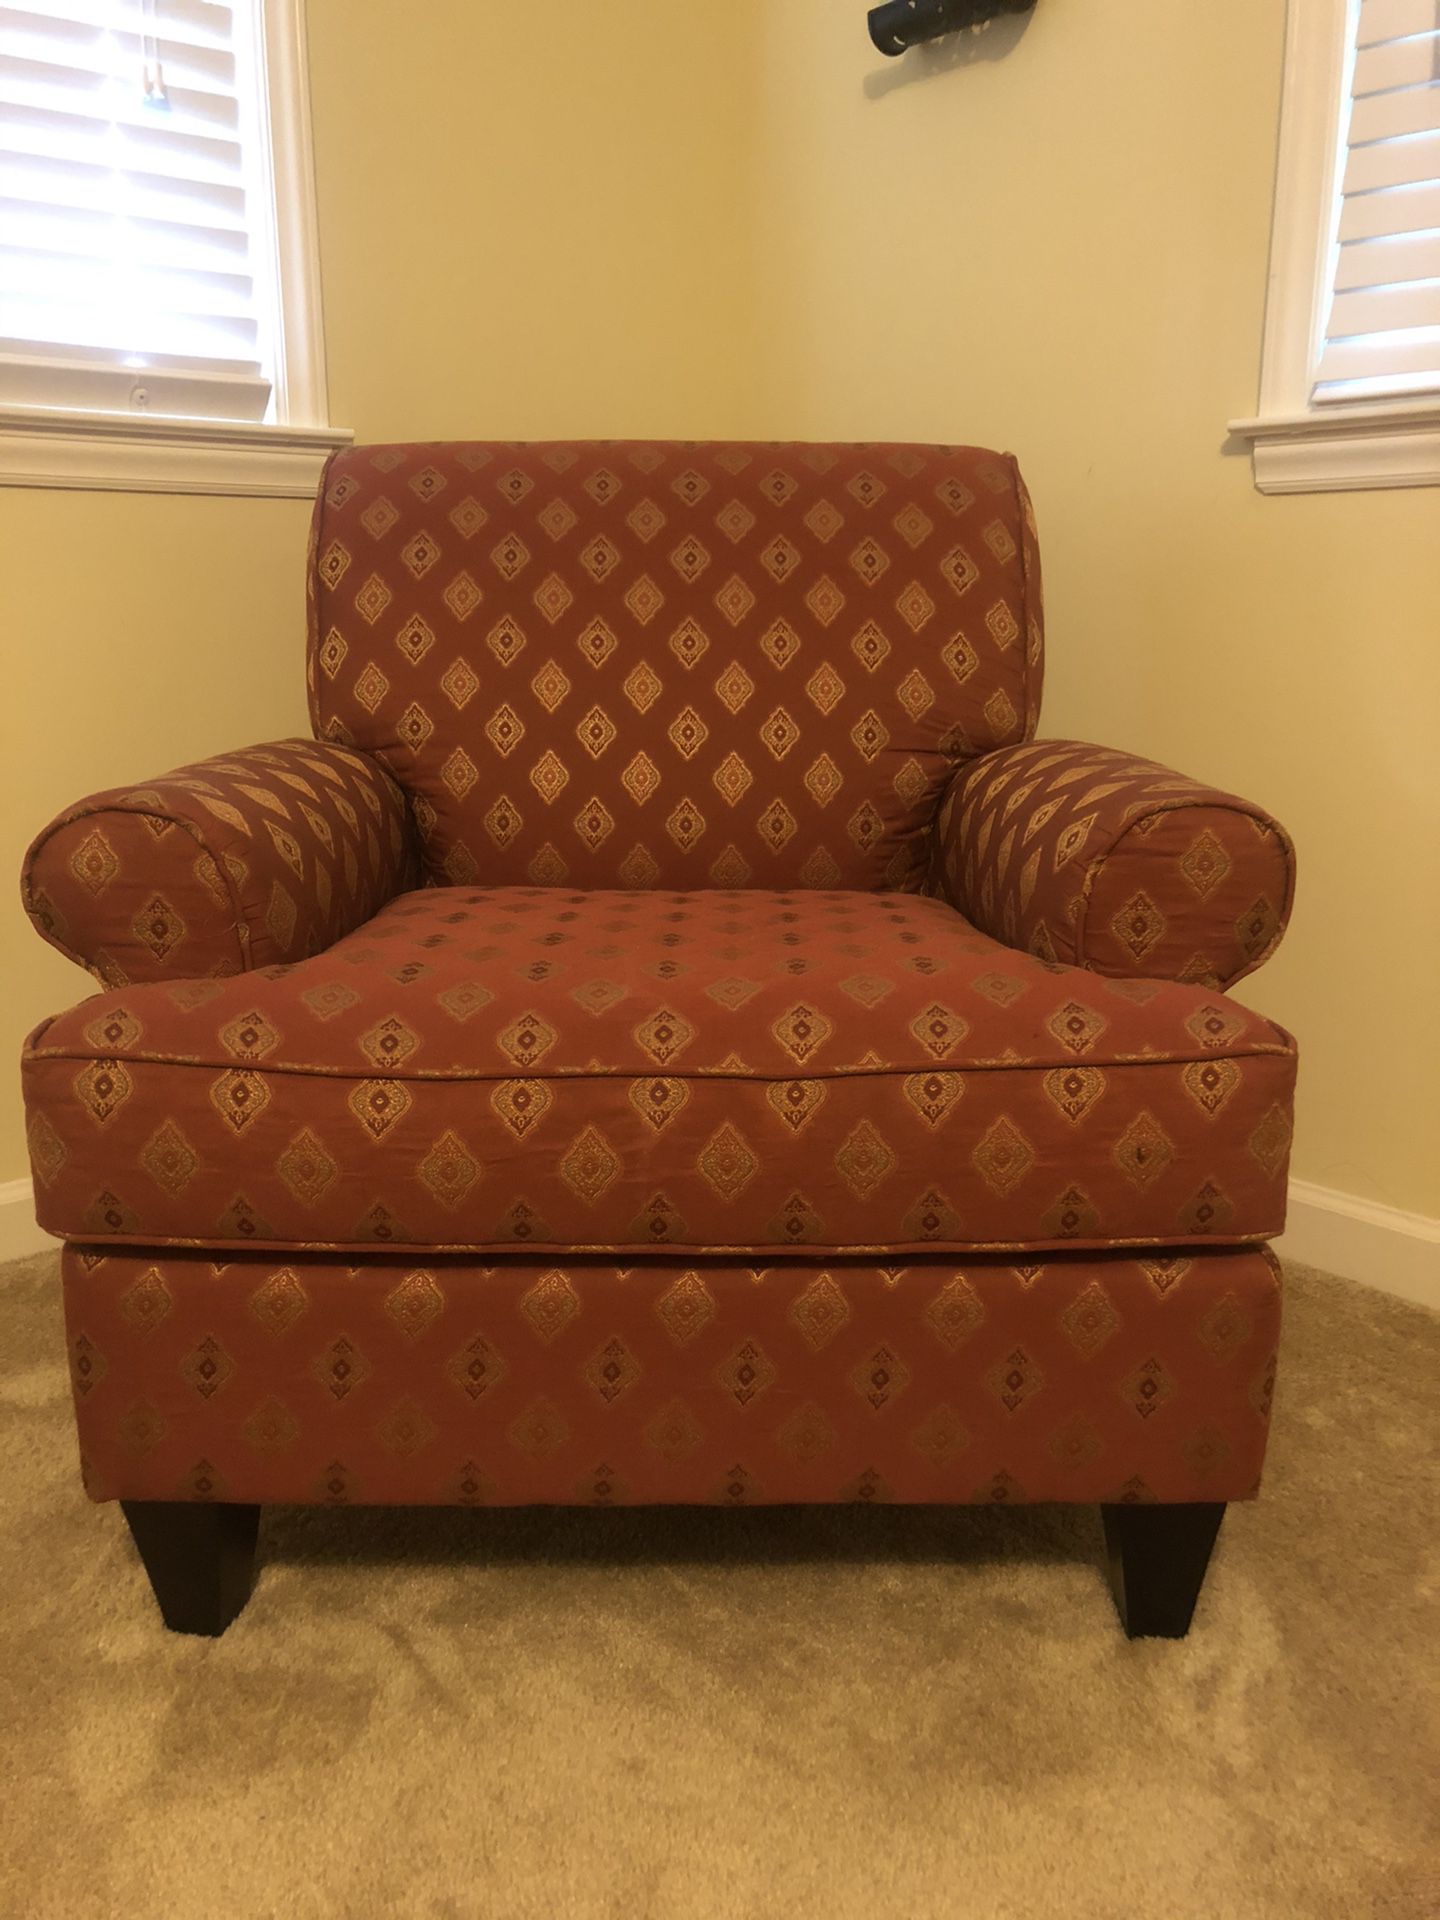 FREE Upholstered chair